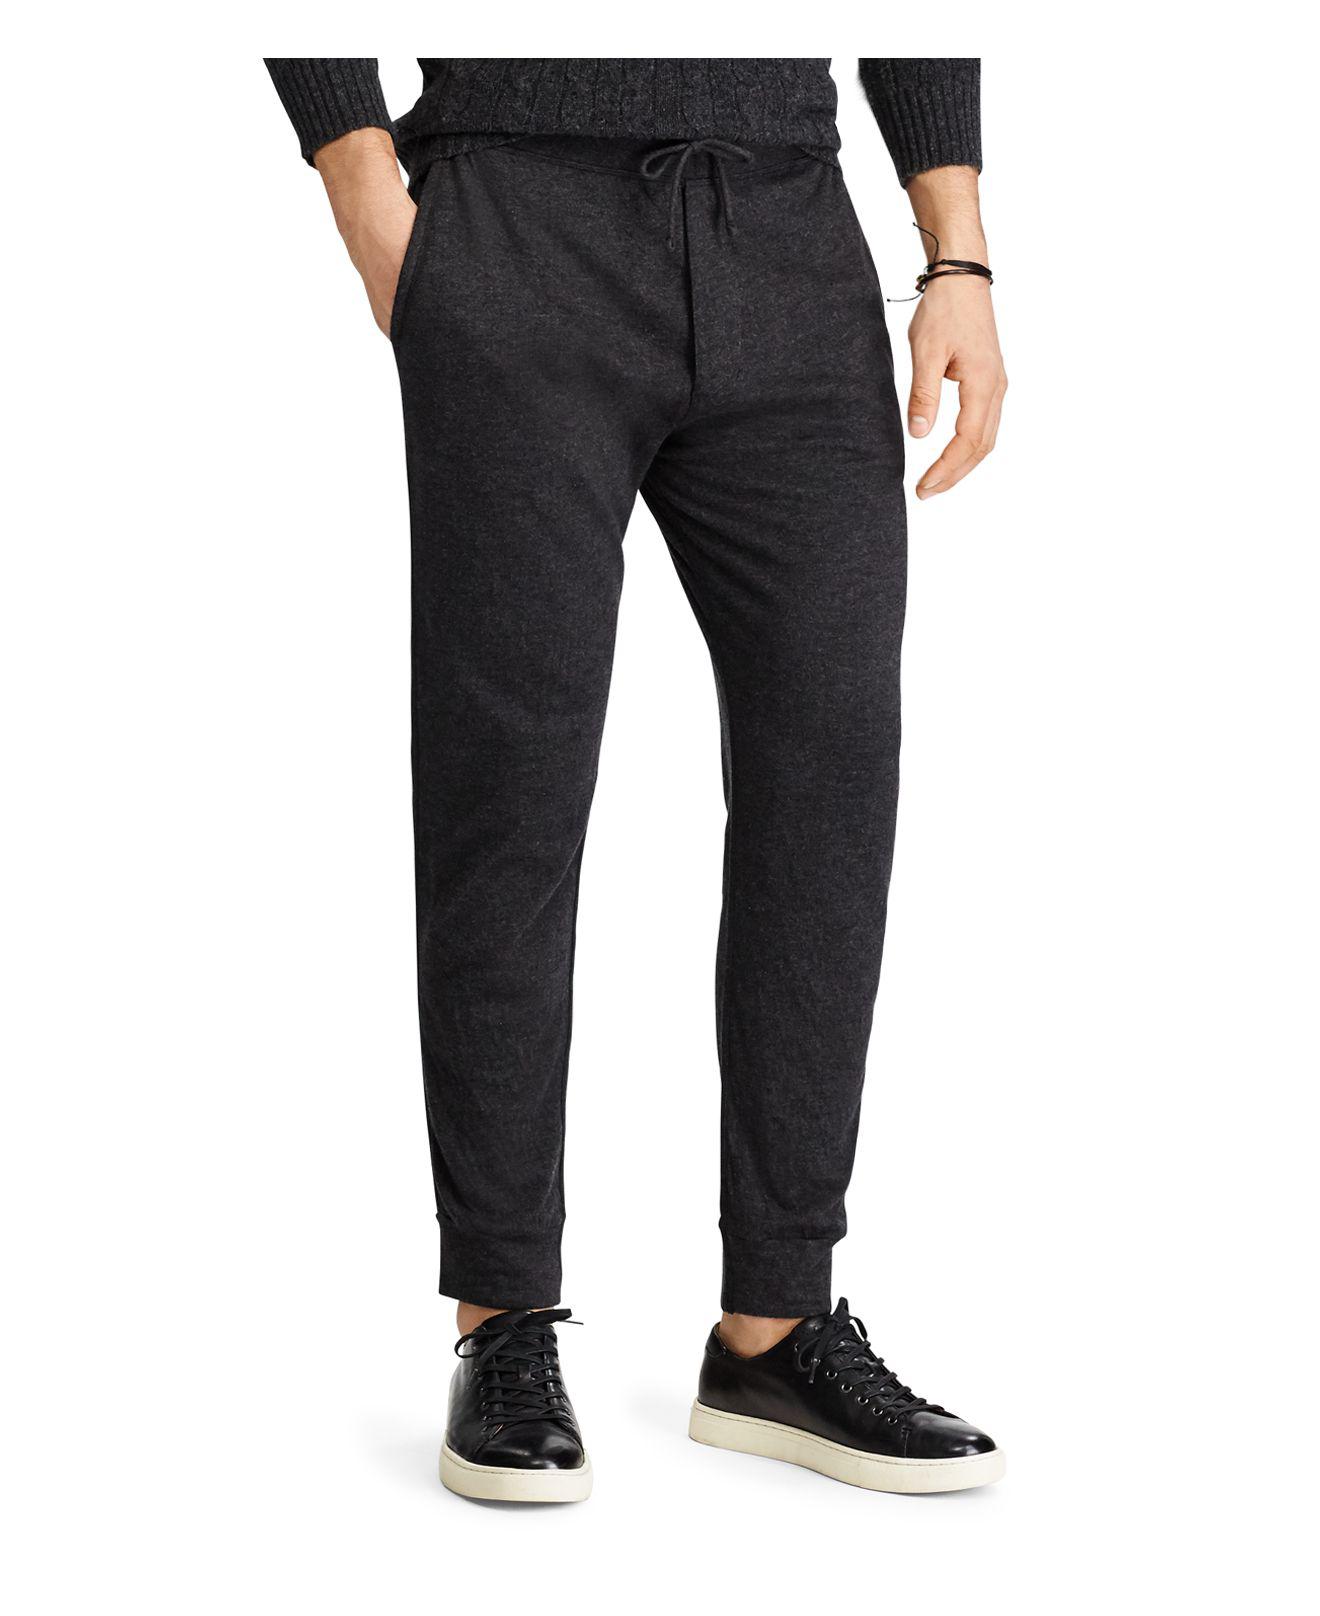 Lyst - Polo ralph lauren Tapered Knit Jogger Pants in Black for Men